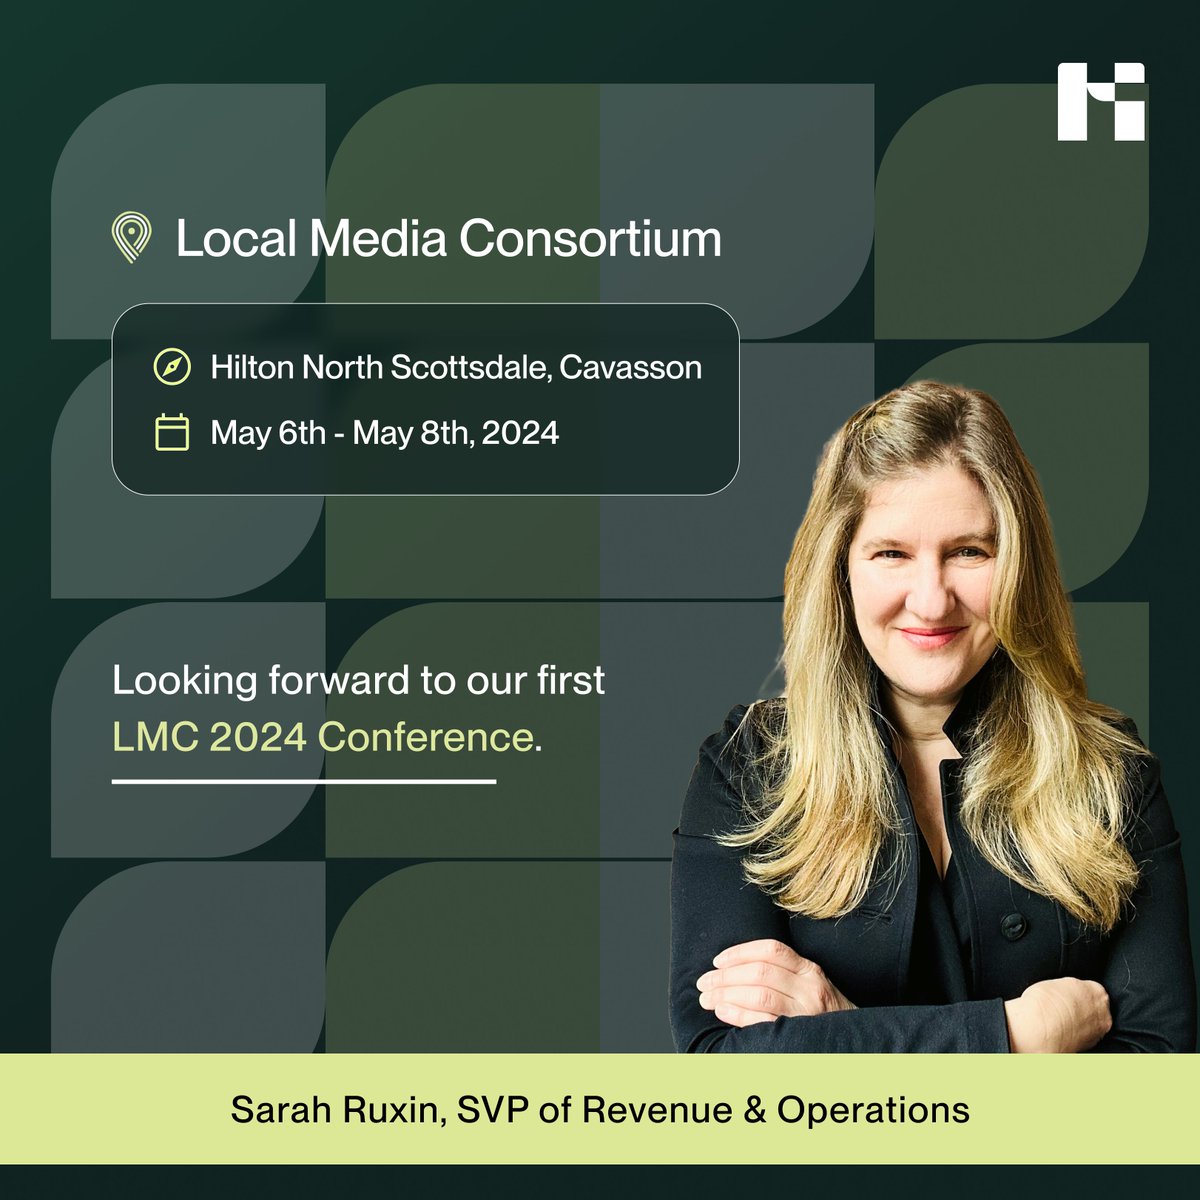 We are all excited for our first LMC Conference 2024 in Scottsdale, AZ. ⛳ 

And if you’re here too, don’t forget to meet Sarah Ruxin, our SVP of Revenue & Operations. 👋 

See you soon! 

#MediaInnovation #DigitalMedia #LocalPublishers #LMC2024 #LocalMedia